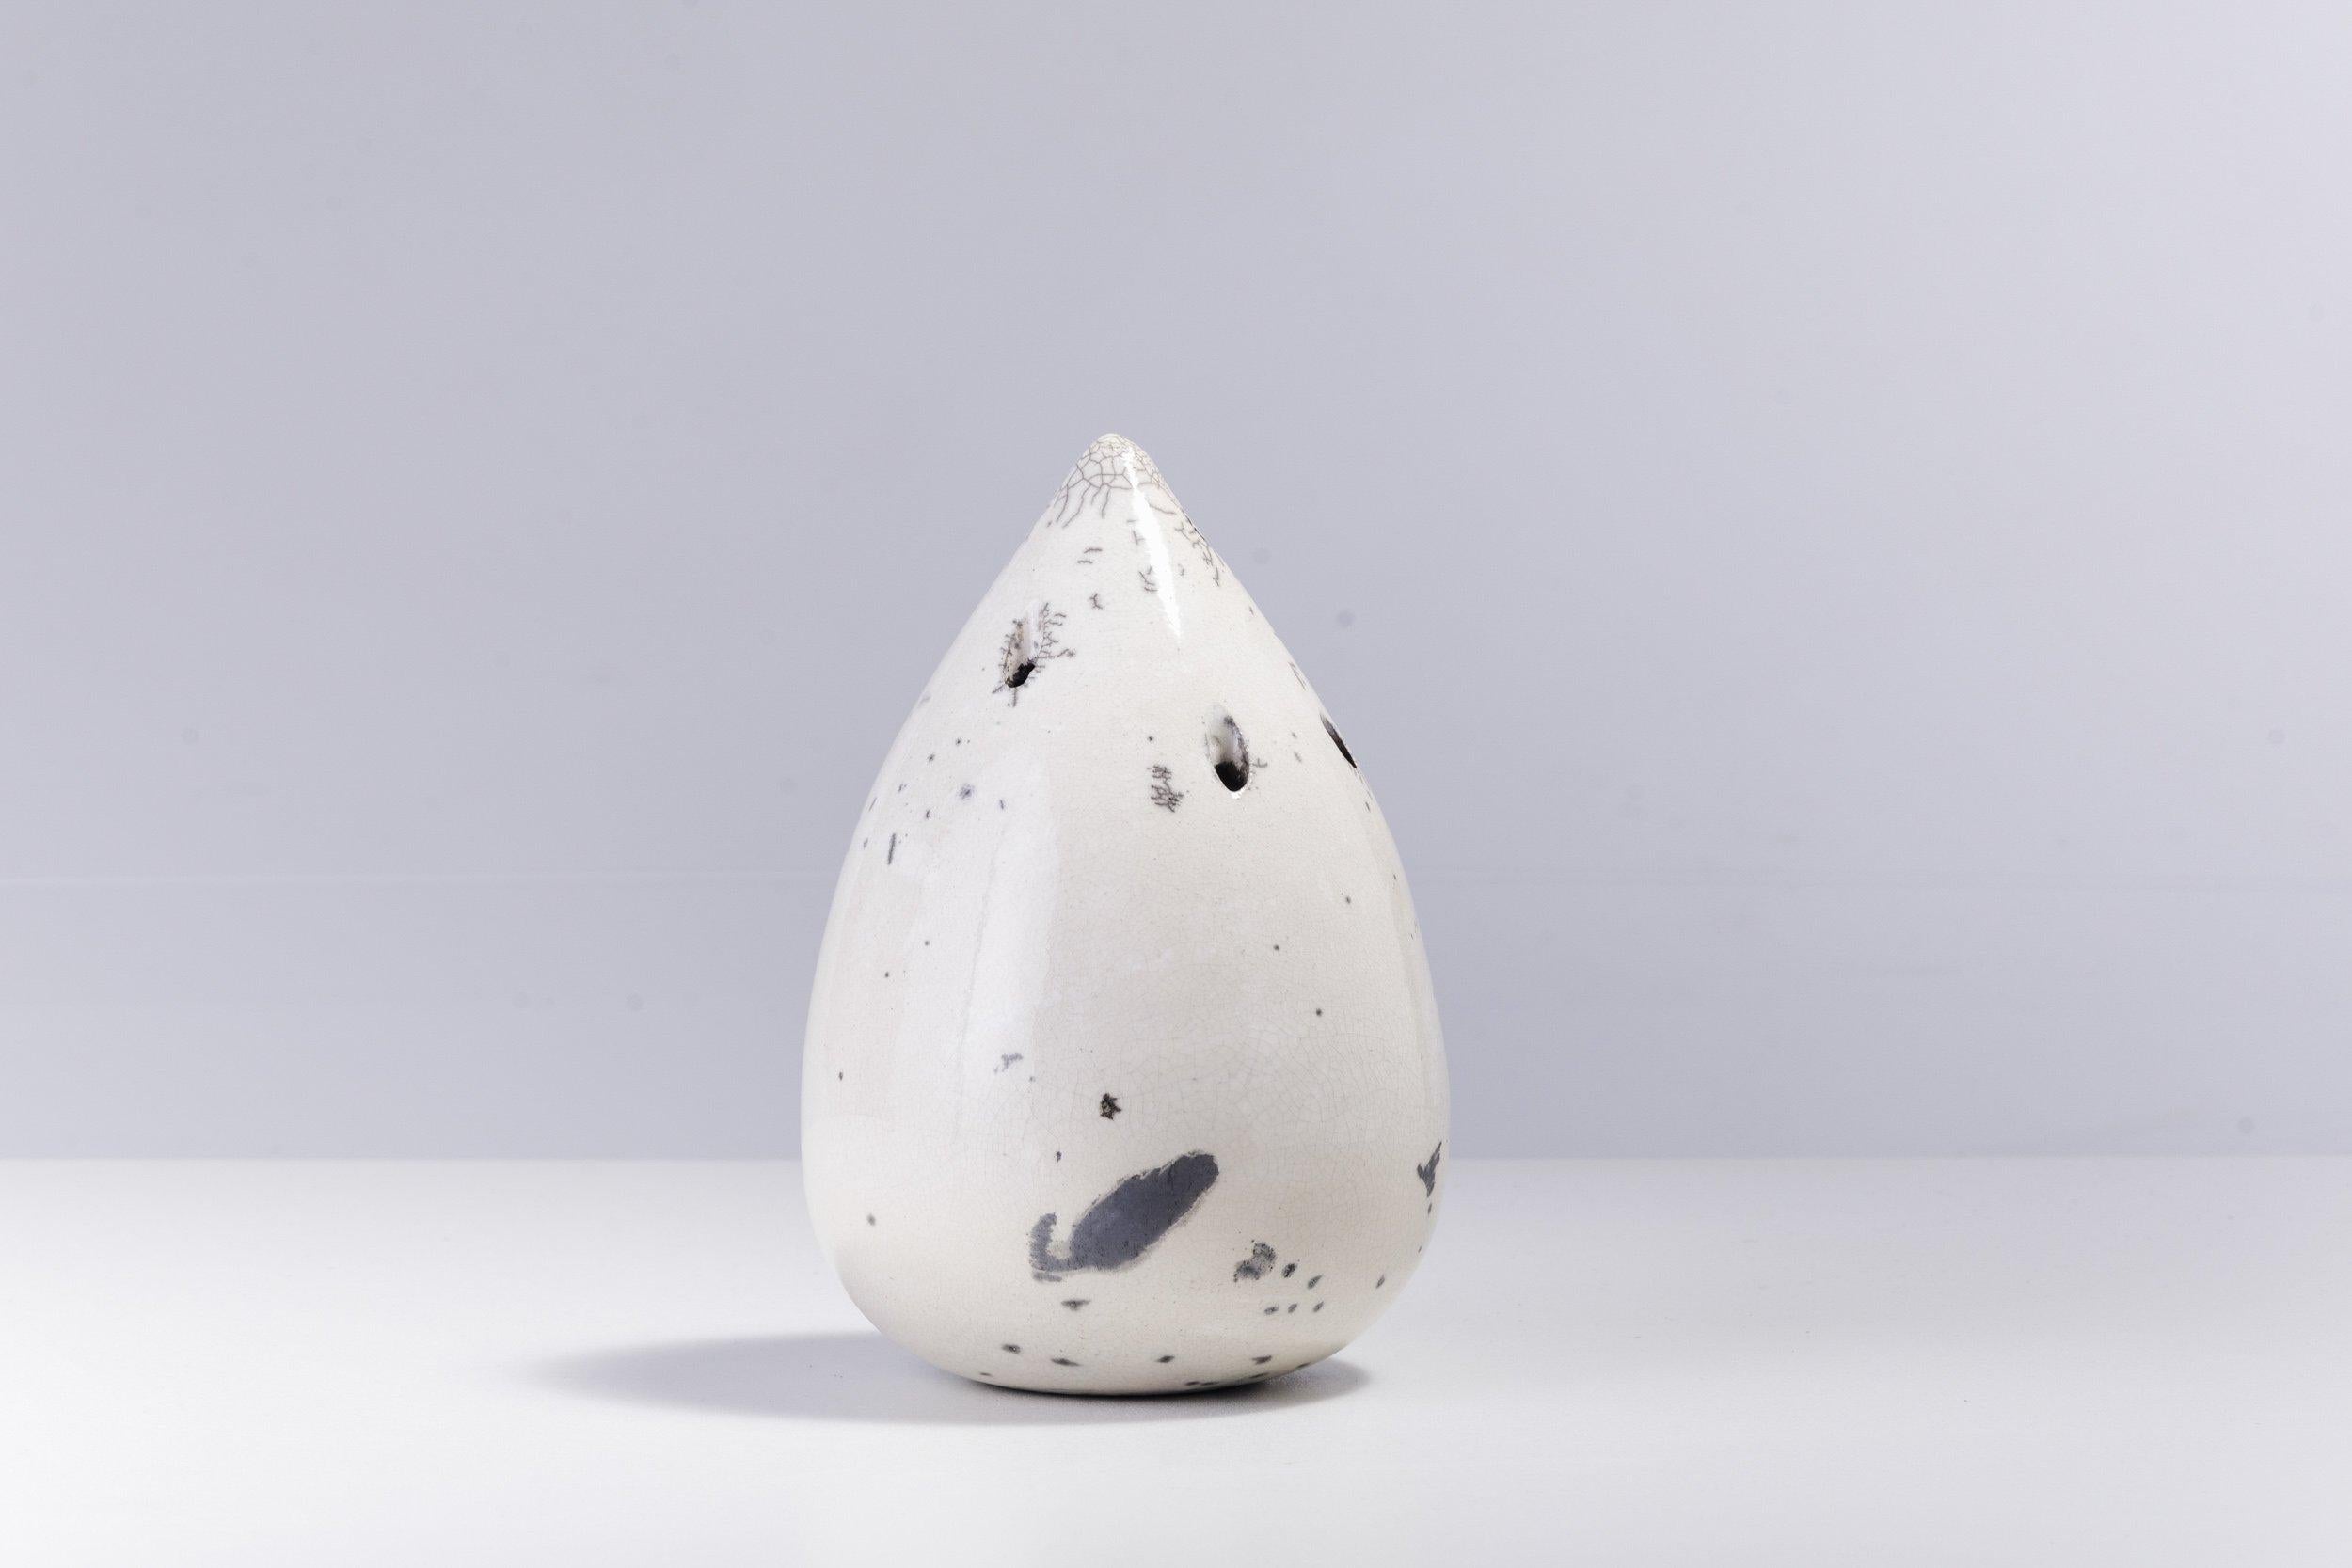 Japanese Modern LAAB Goccia Incense Holder Raku Ceramics White Crackle In New Condition For Sale In monza, Monza and Brianza